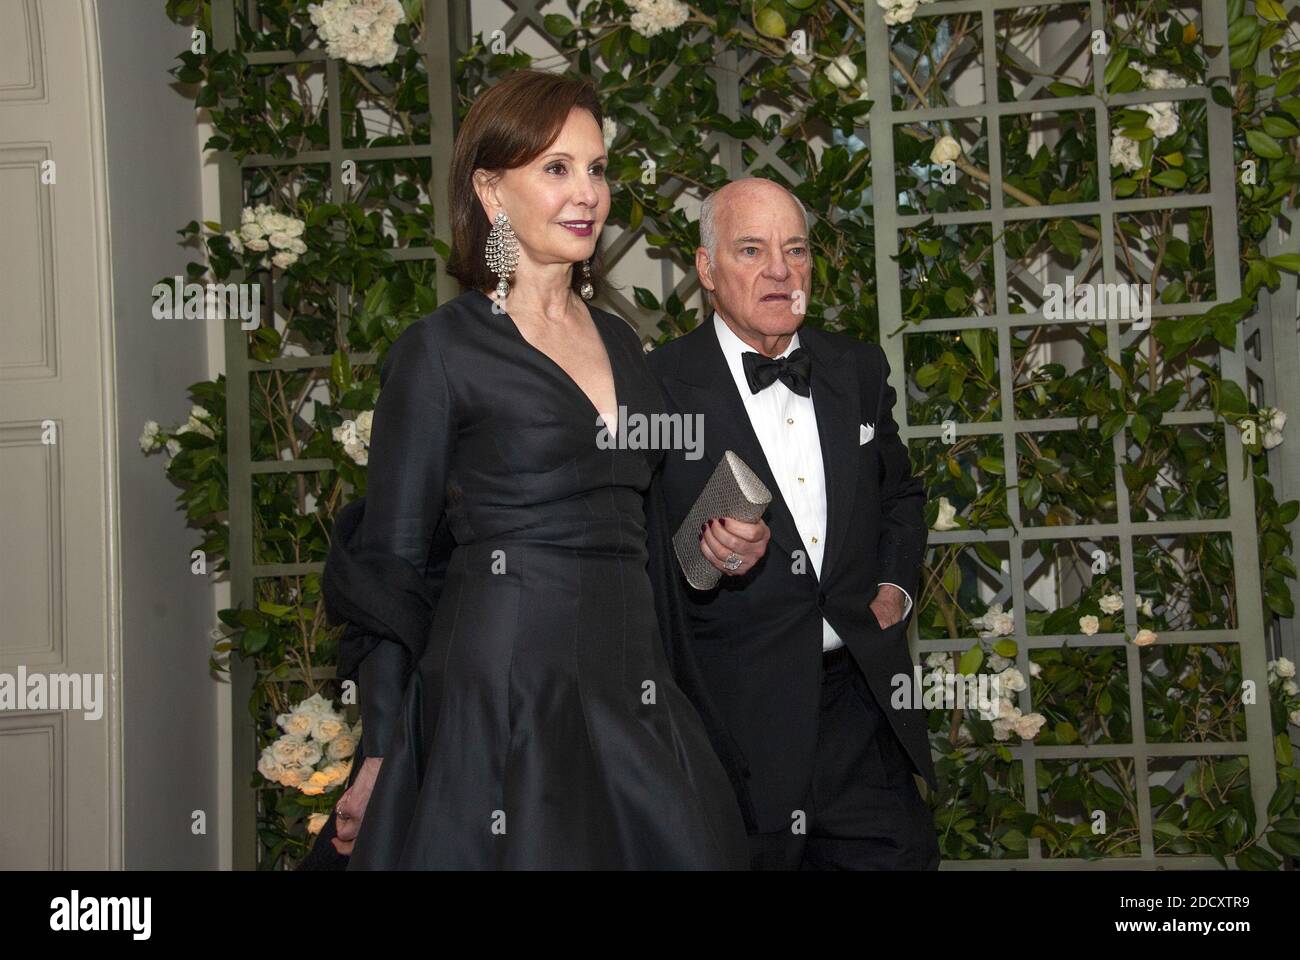 Henry Kravis and Mrs. Marie-Josée Kravis arrive for the State Dinner honoring Dinner honoring President Emmanuel Macron of the French Republic and Mrs. Brigitte Macron at the White House in Washington, DC, USA on Tuesday, April 24, 2018. Photo by Ron Sachs/CNP/ABACAPRESS.COM Stock Photo